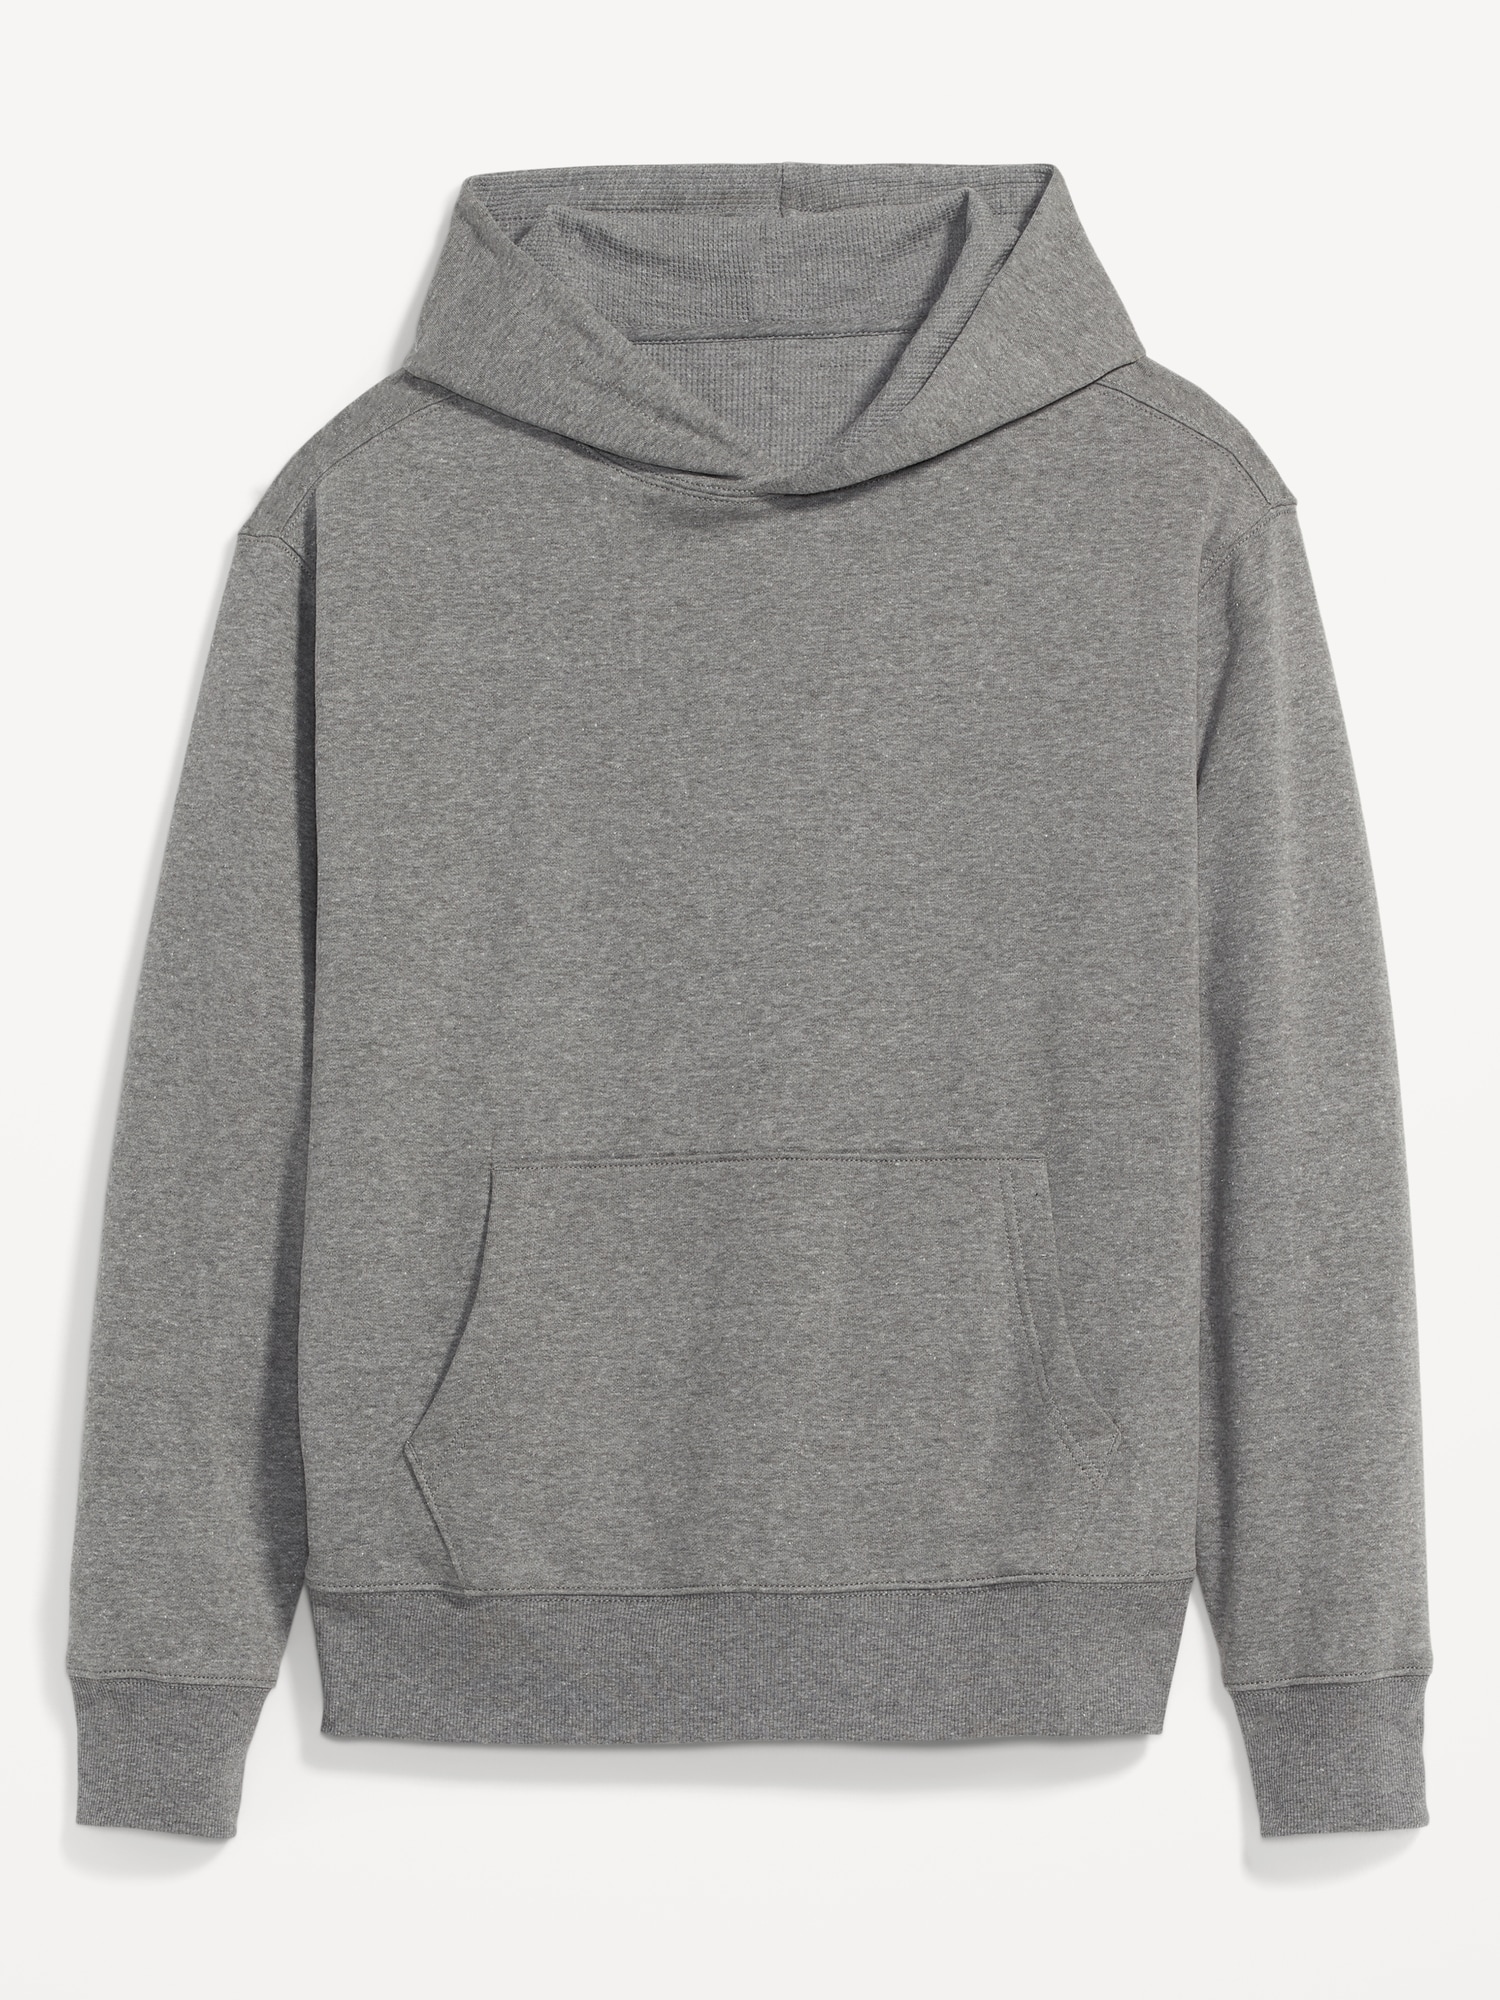 Oversized Thermal-Lined Pullover Hoodie for Men | Old Navy